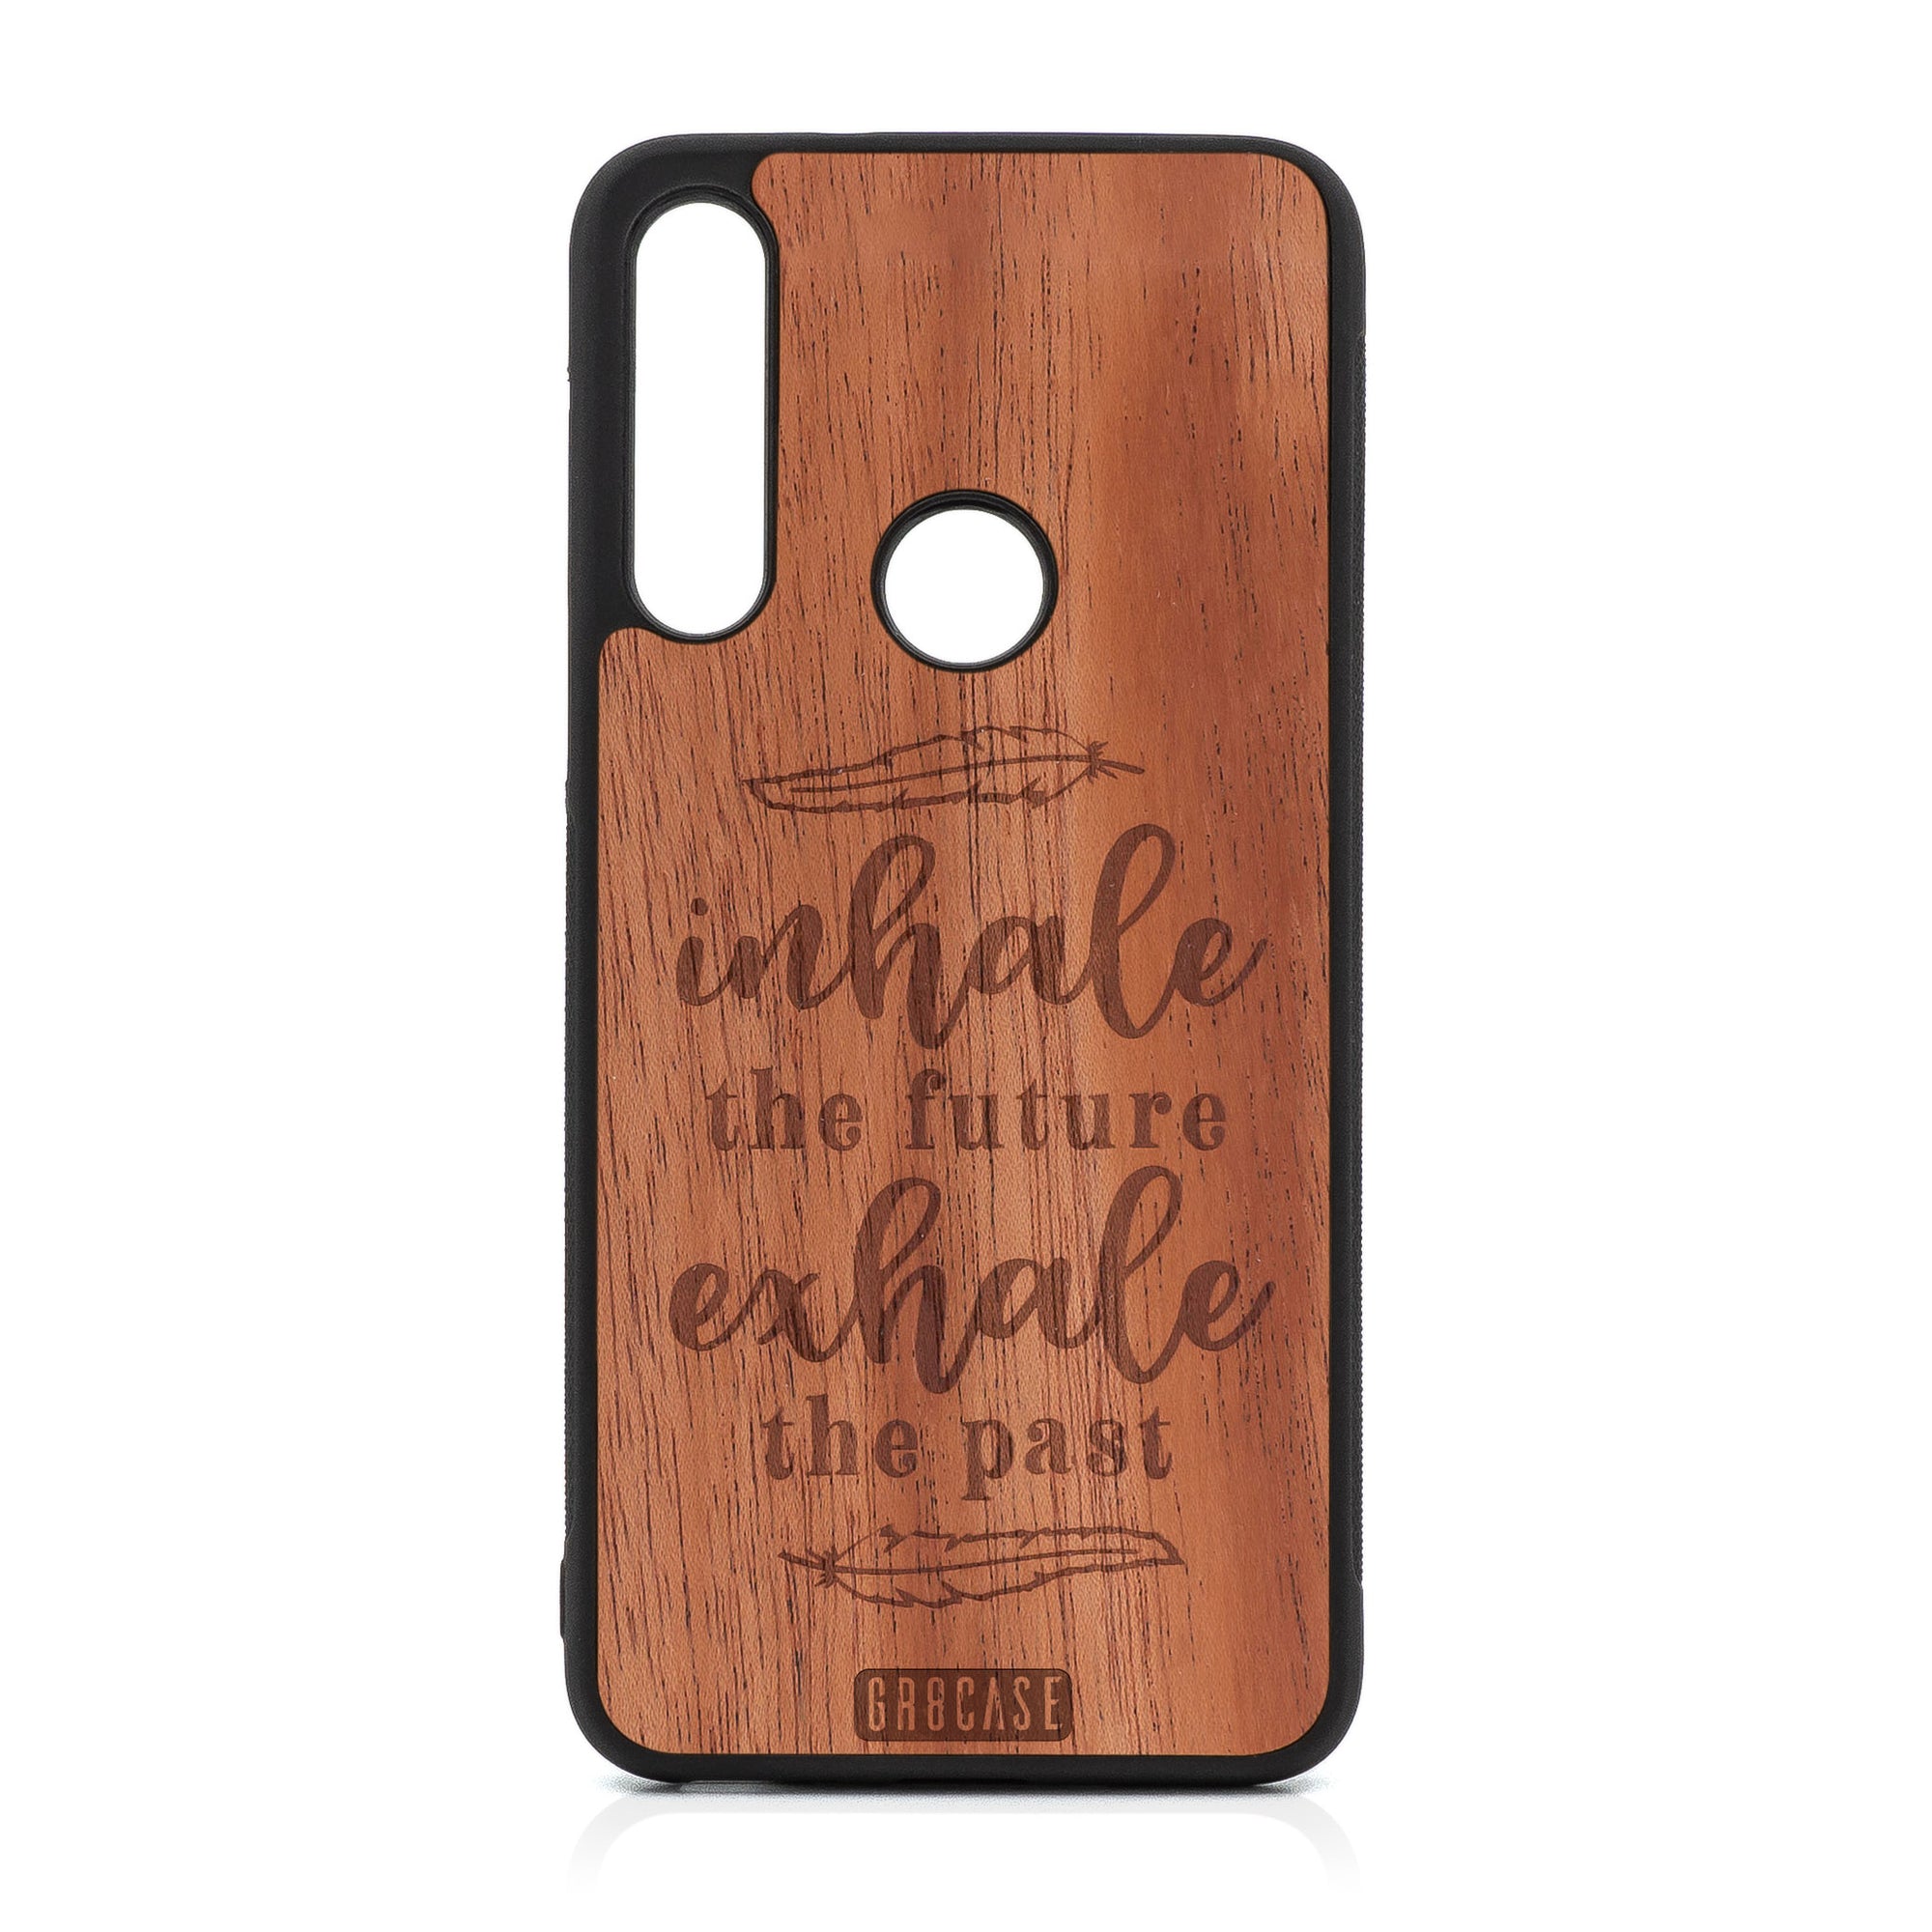 Inhale The Future Exhale The Past Design Wood Case For Moto G Fast